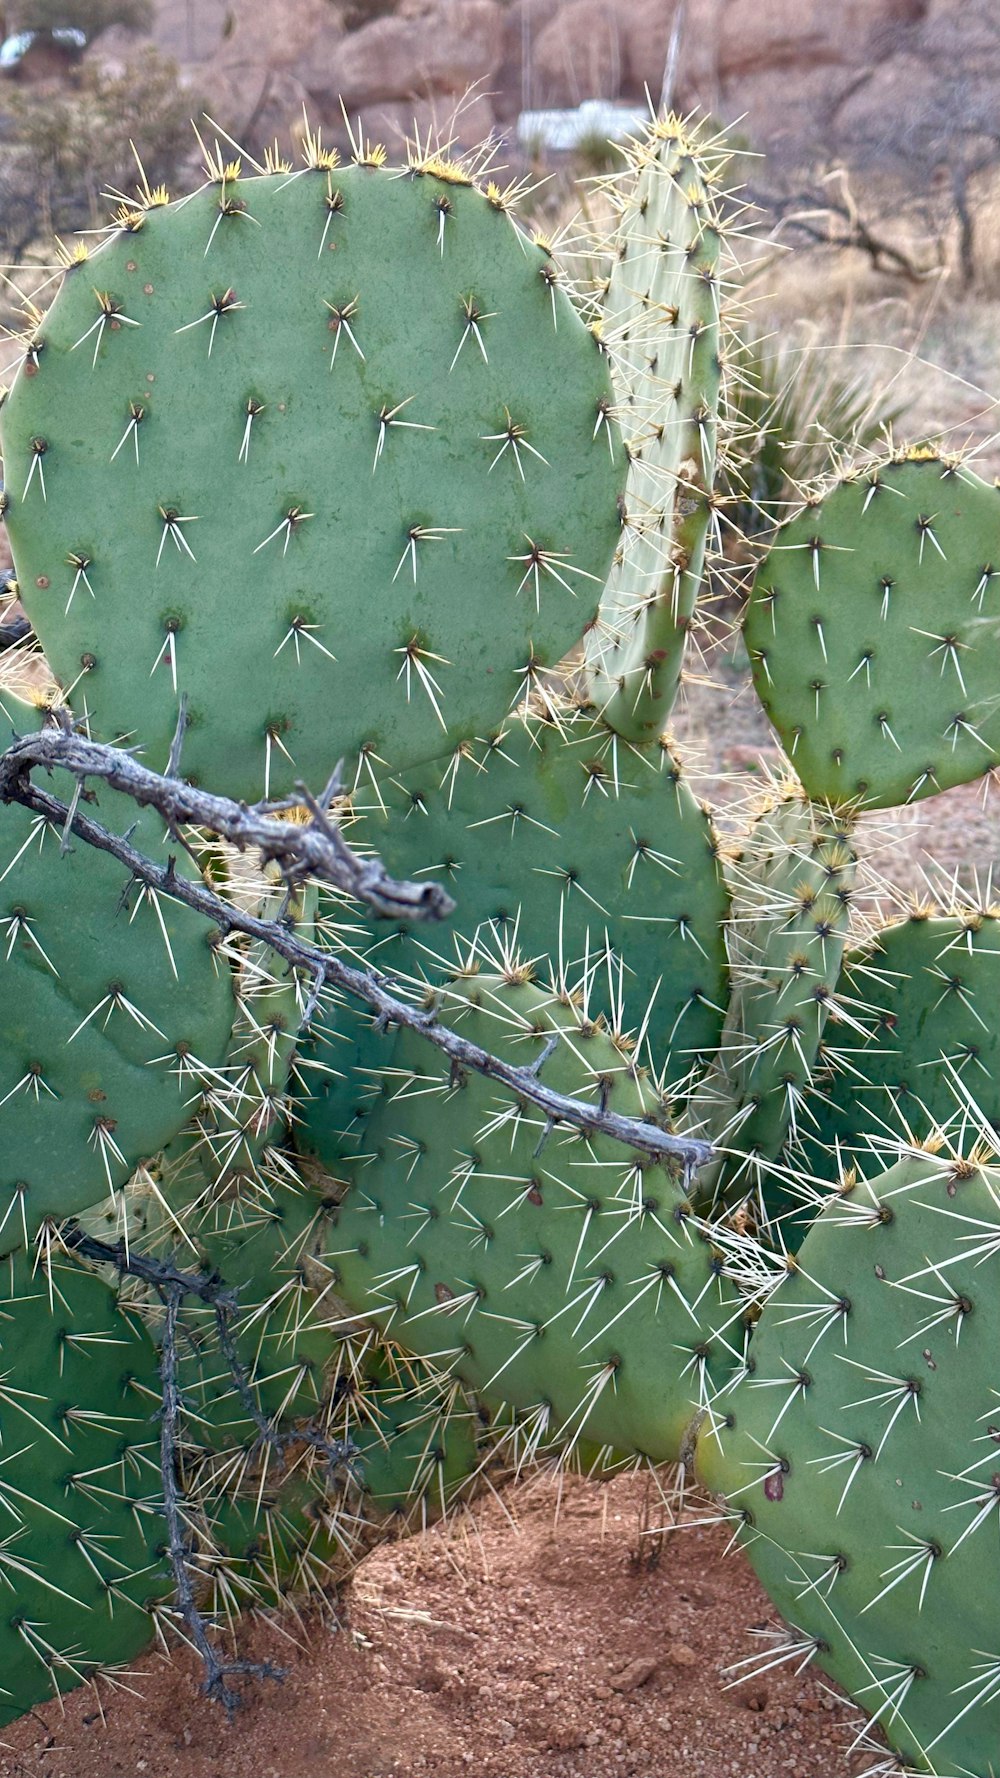 a green cactus with a long thin stem